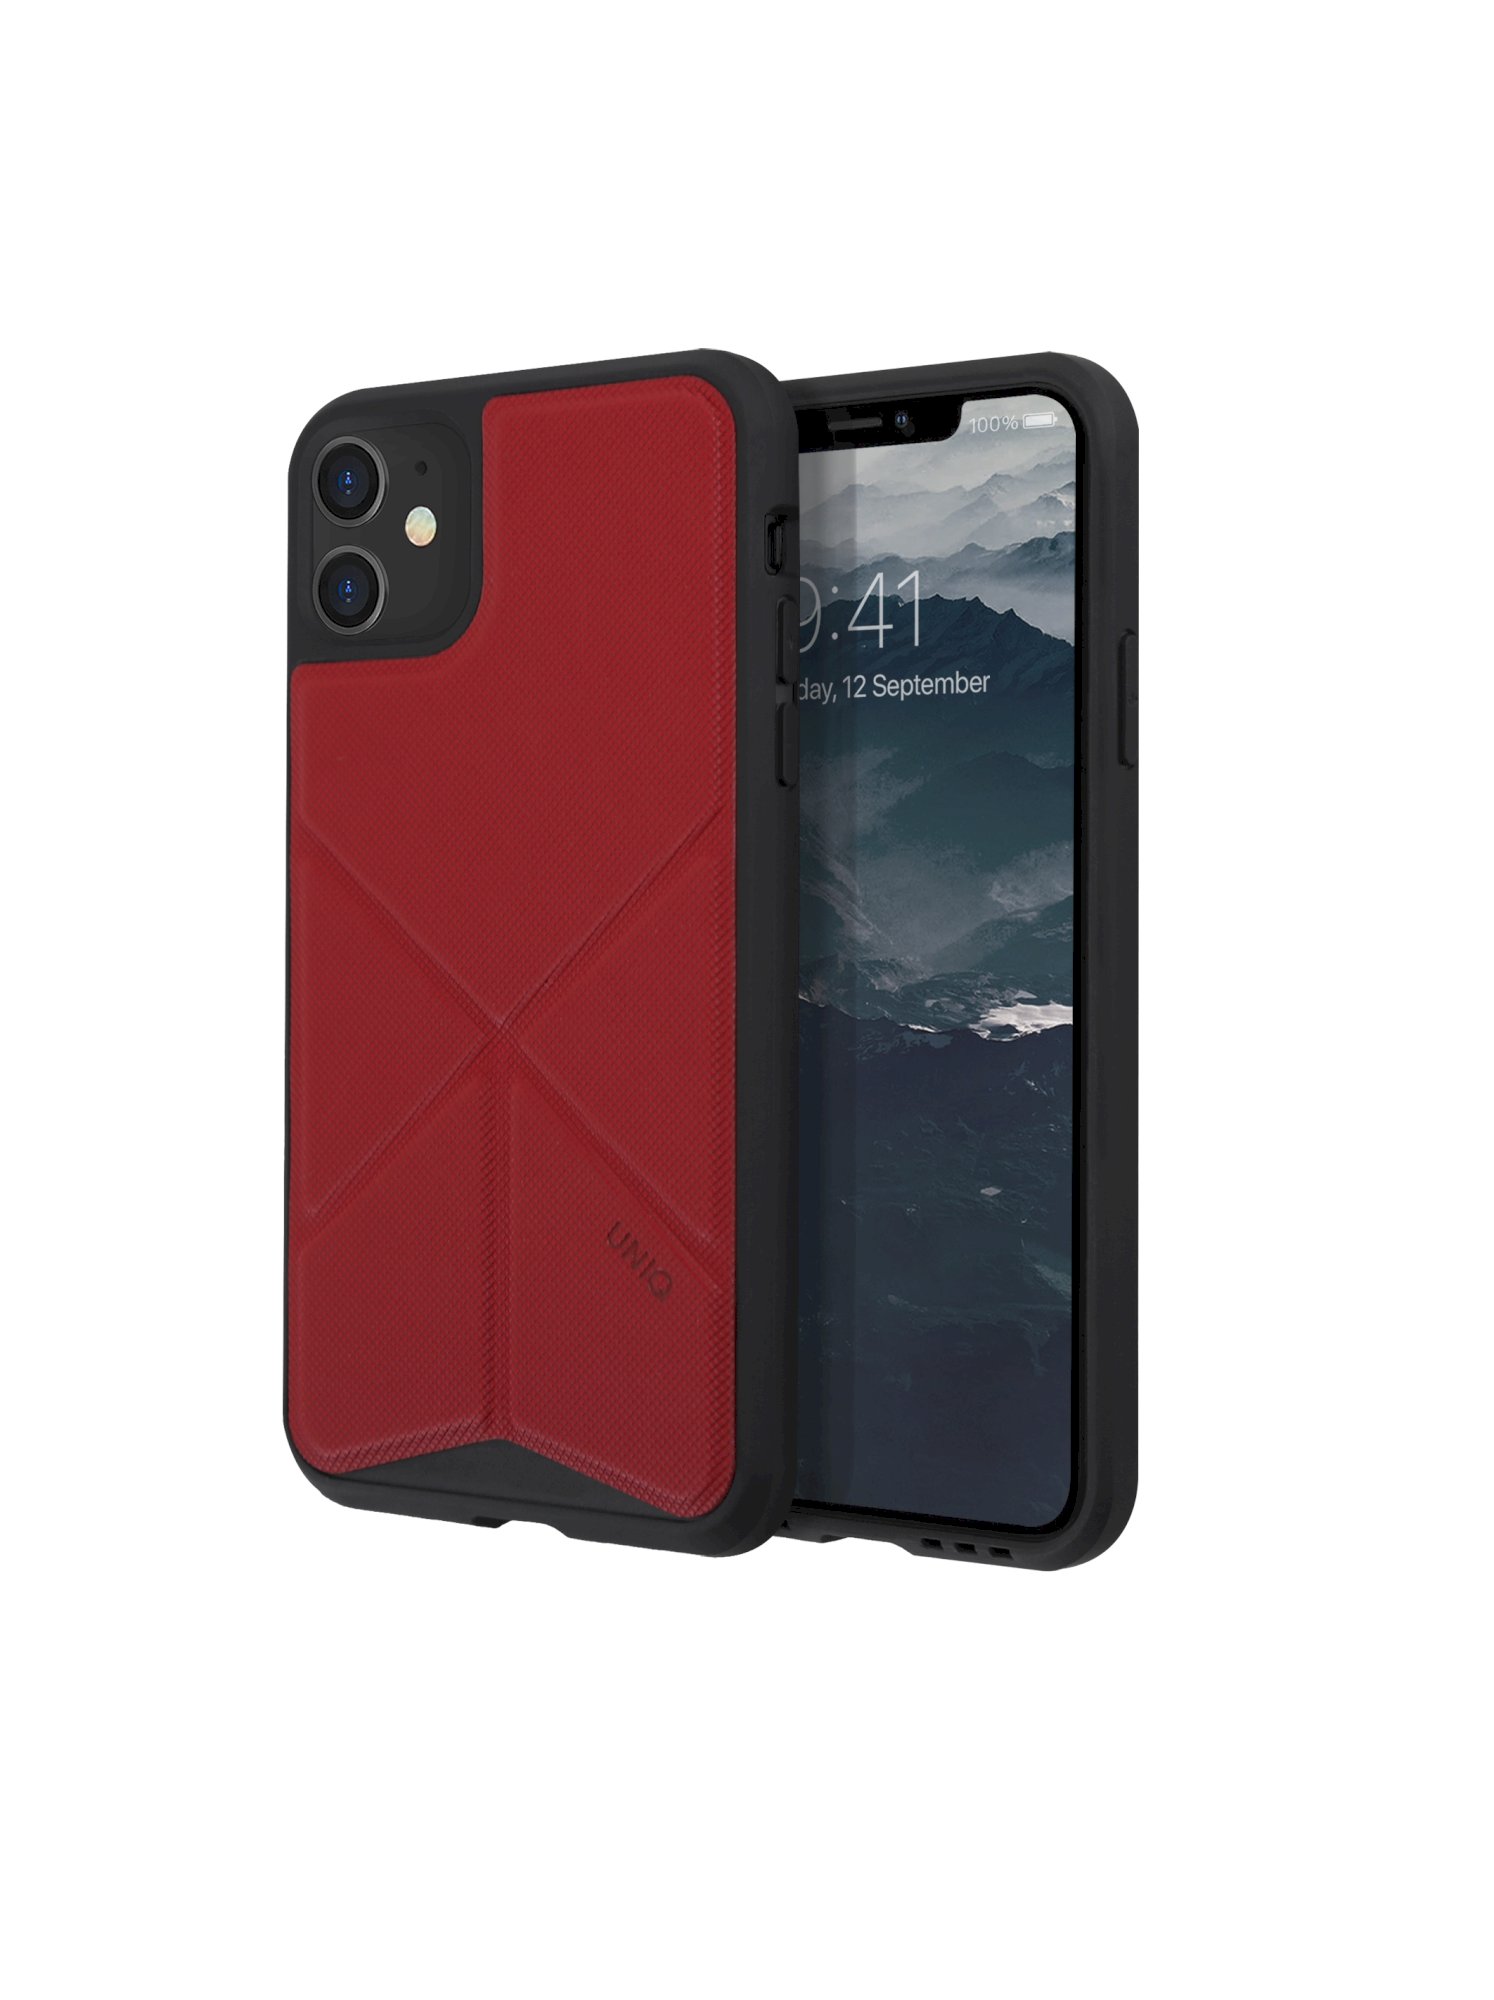 iPhone 11, hoesje transforma, stand up fury racer, rood